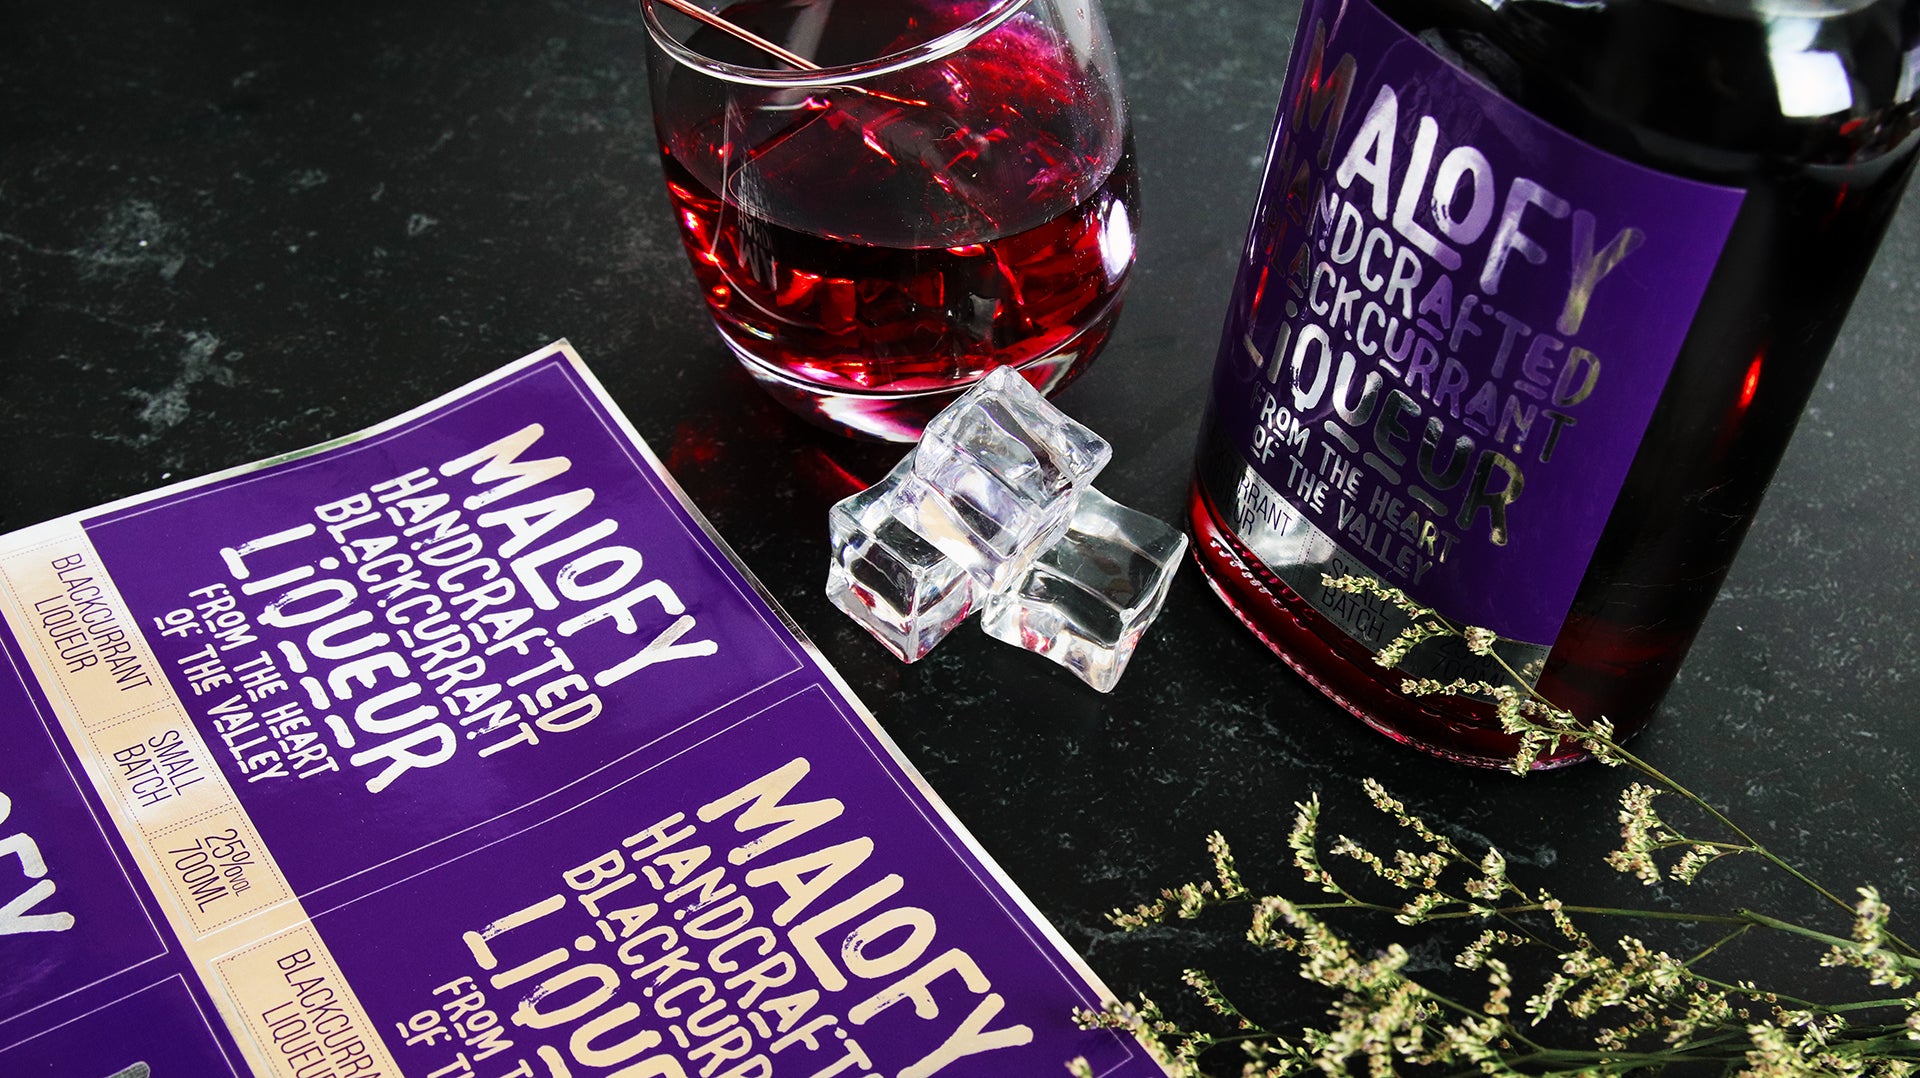 Rectangle mirror silver branding label applied to a glass bottle containing blackcurrant liqueur with a stack of sticker sheets next to a tilted glass